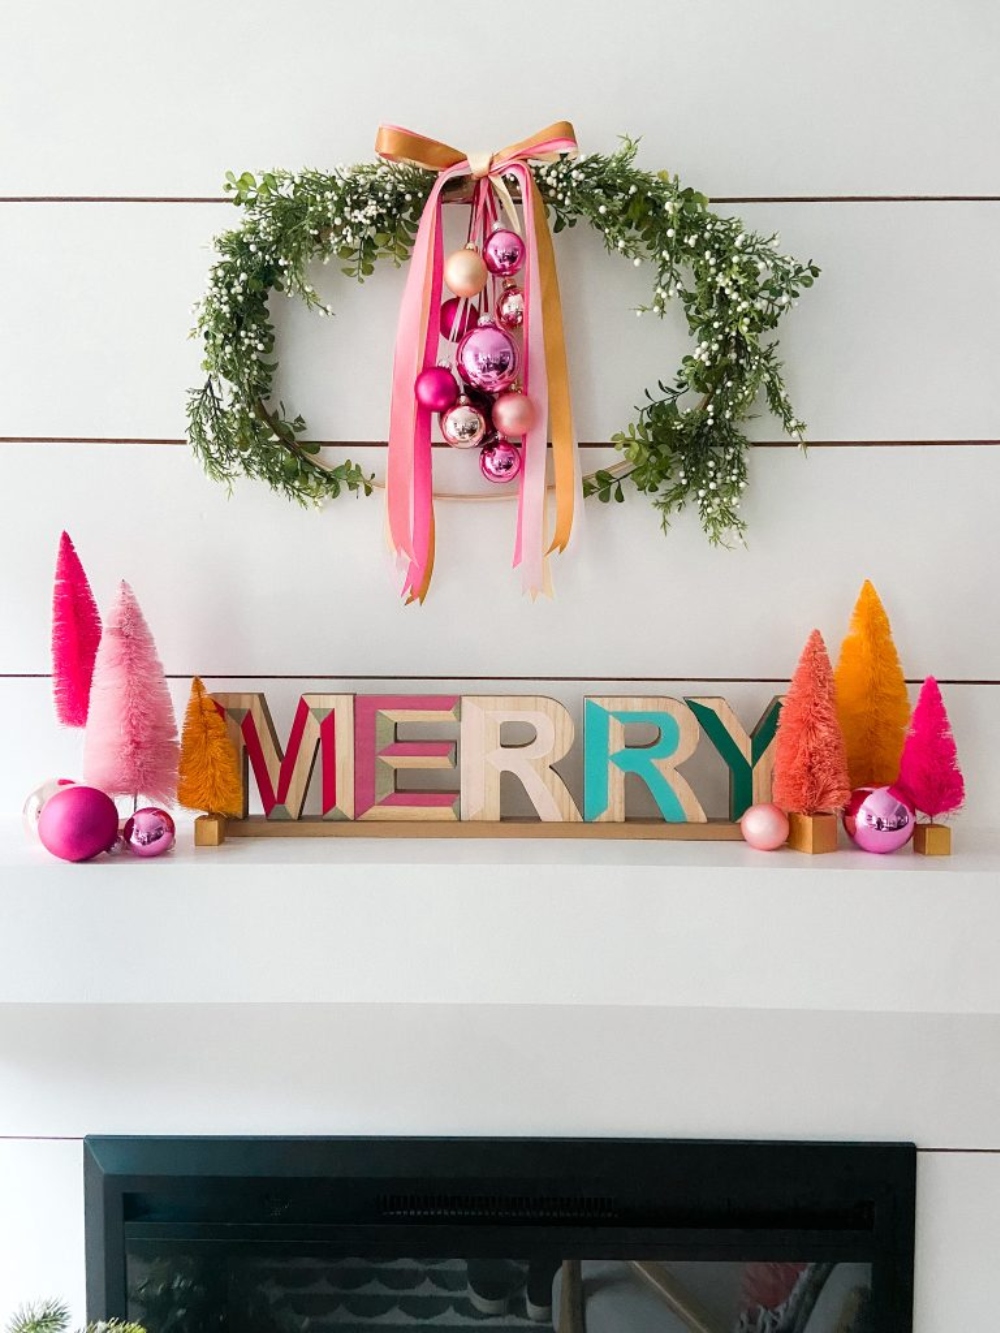 Embroidery Hoop Hanging Ornament Wreath. Three ways to create a beautiful hanging ornament wreath for the holidays! 